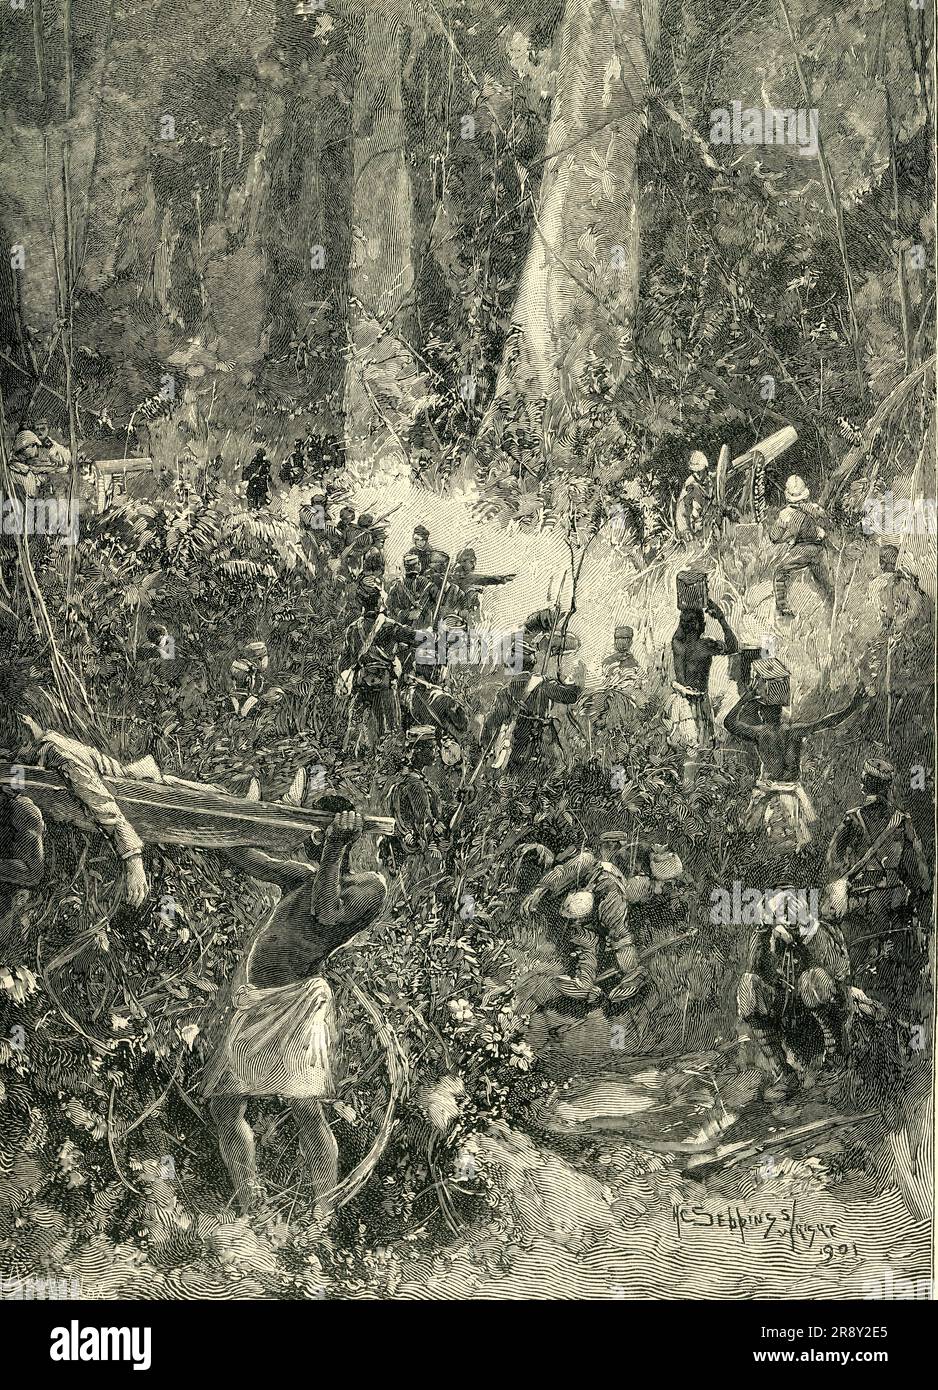 'The Ashanti War of 1900: A Fight in the Forest', c1900. Anglo-Ashanti Wars, West Africa. 'Few more difficult campaigns have ever been undertaken than this advance, in the height of the unhealthy rain season, through flooded forests, by a handful of semi-savage black troops, led by three or four score gallant and devoted British officers. The enemy, 40,000 strong, were cunning and brave; they fought in the security of dense forests, with which they were familiar, and where it was almost impossible to see them, even in the thick of the action...the terrible fever of the country...attacked the u Stock Photo